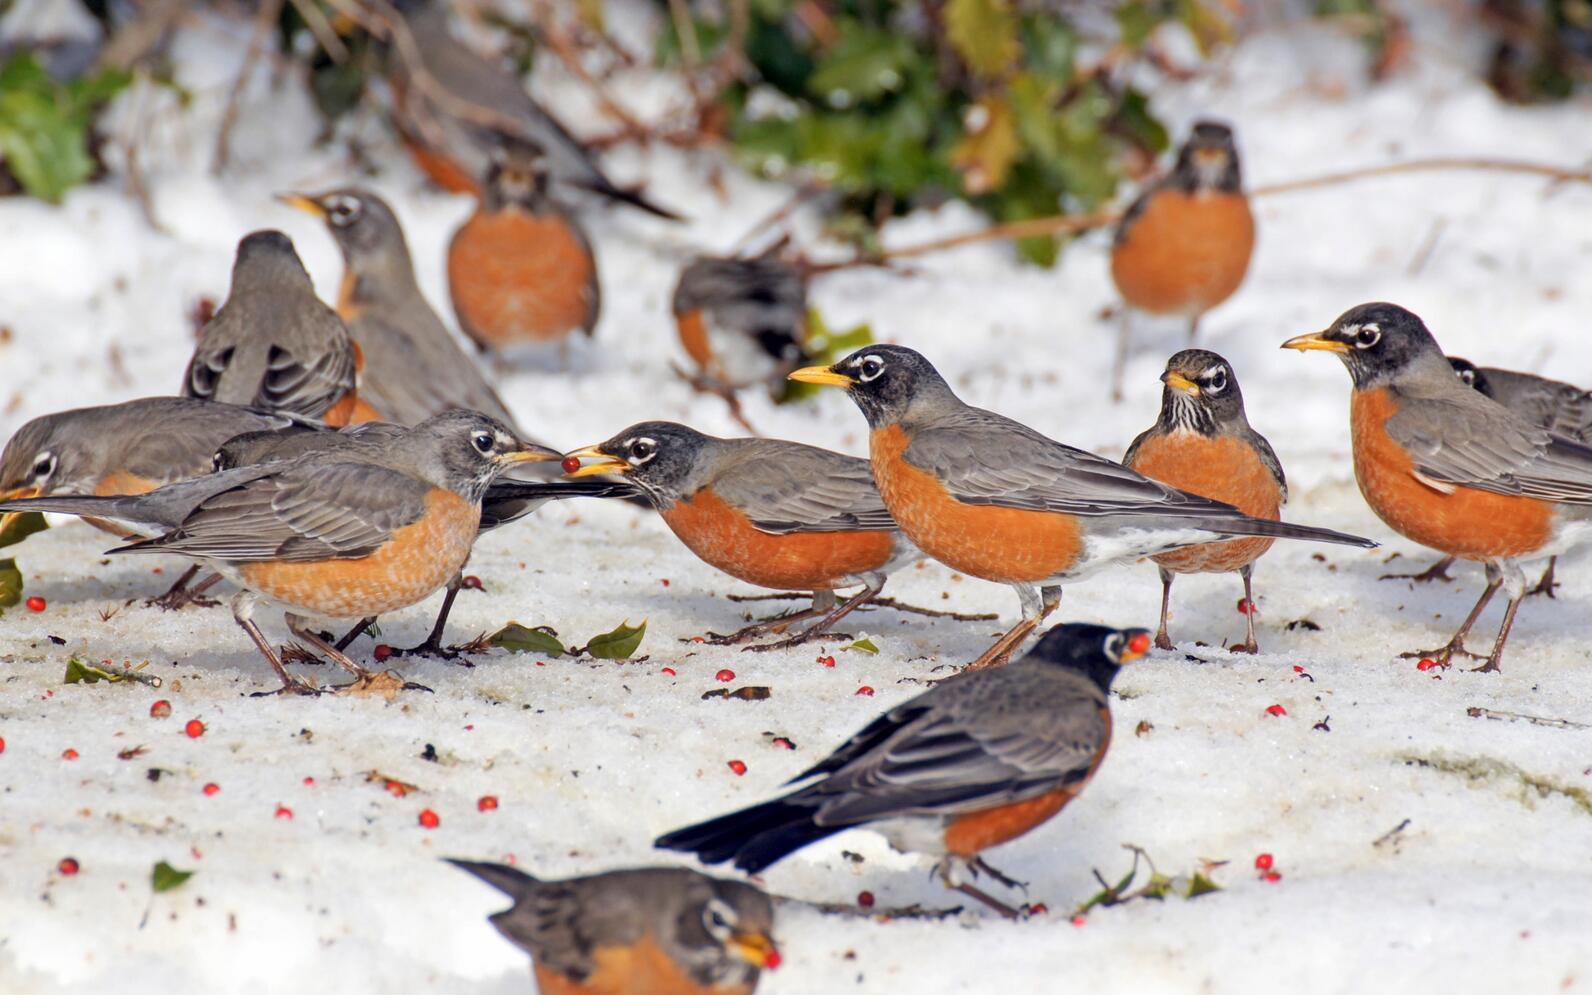 More than a dozen American Robins feed on red berries that have fallen on the snow-covered ground from a nearby shrub. 